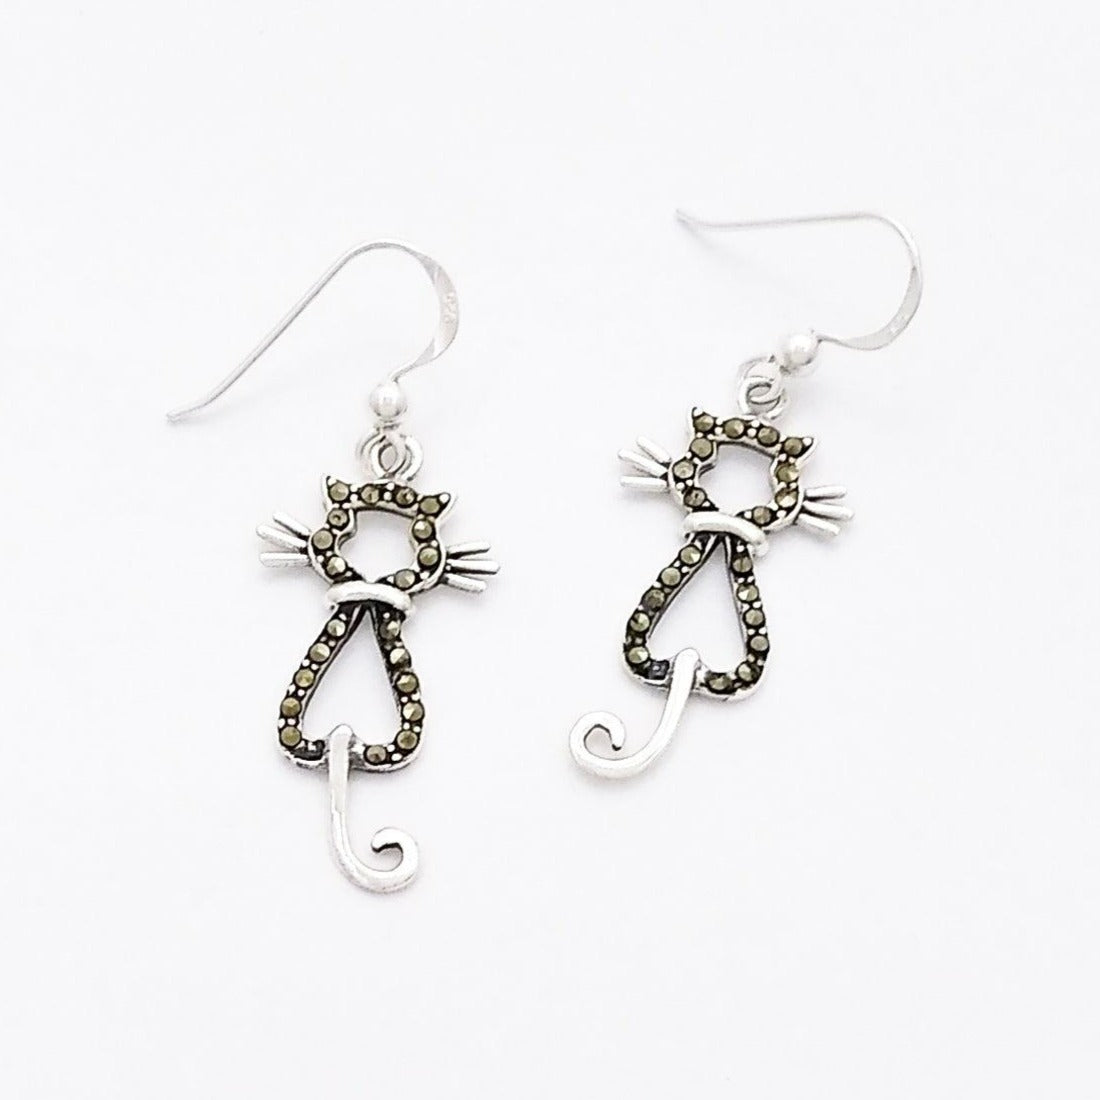 Silver dangle earrings of the silhouette of a cat from the back. The body is outlined in marcasites while the tail, whiskers, and collar are plain silver.